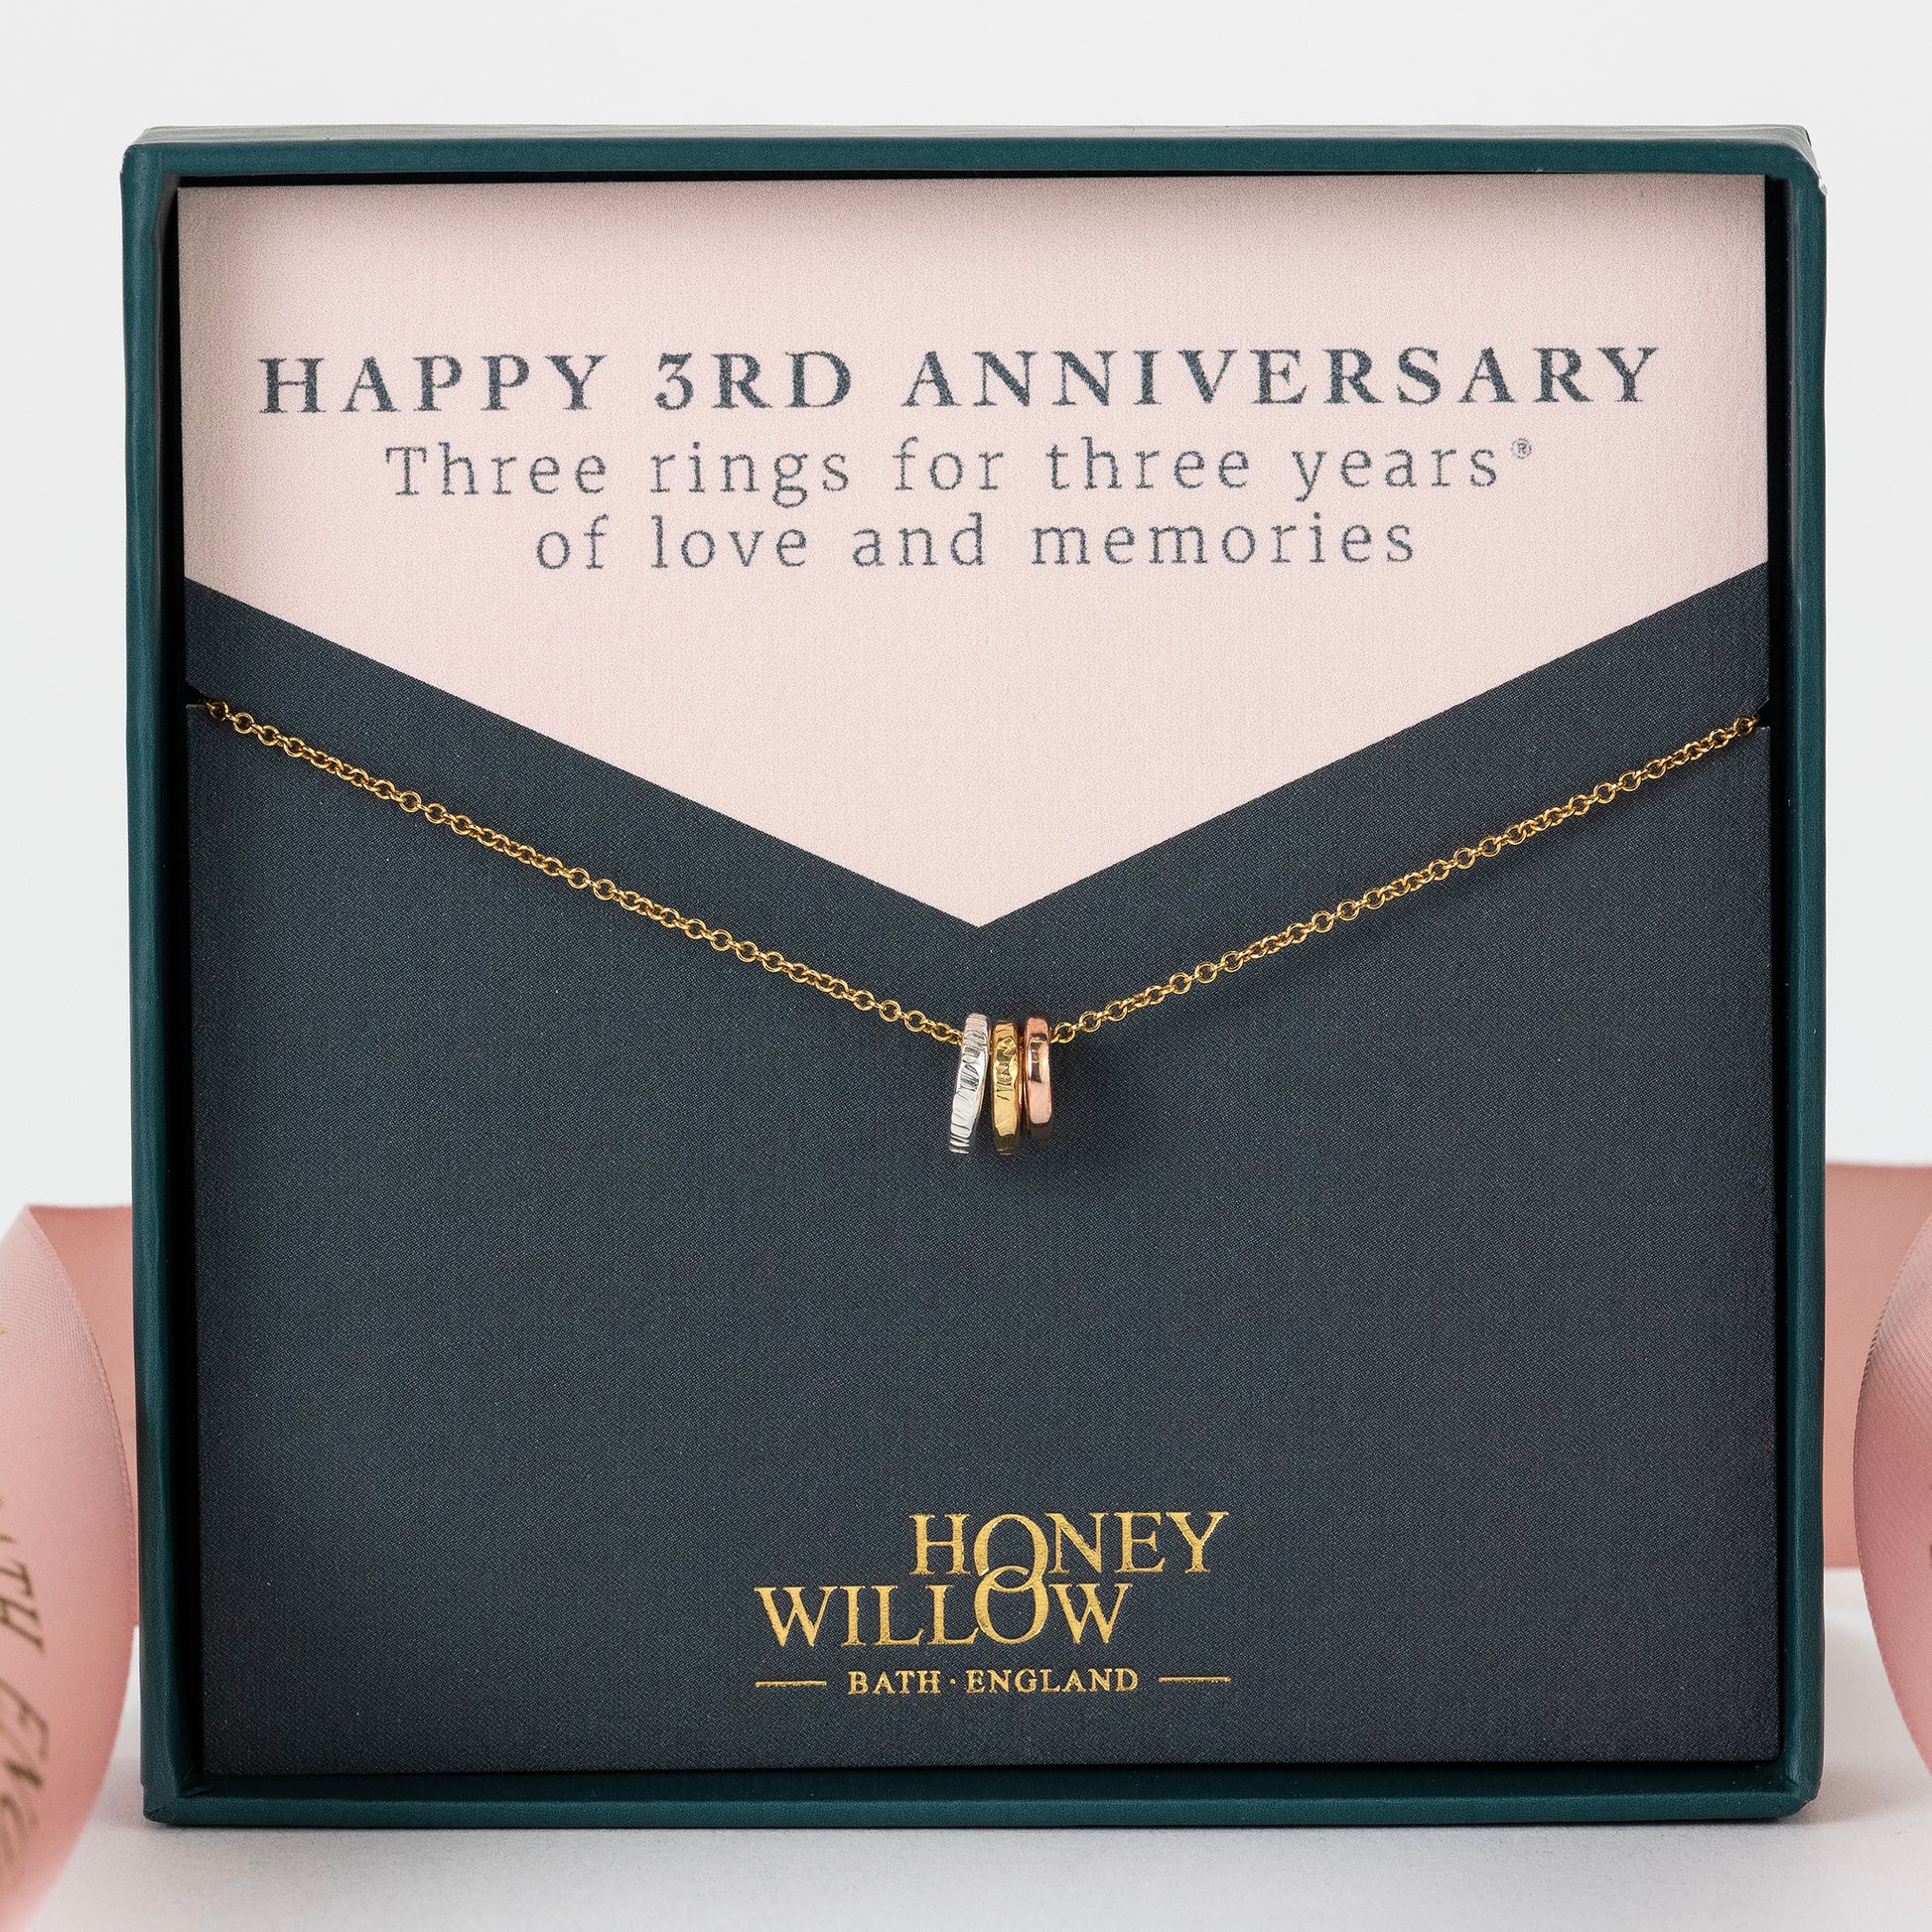 3rd Anniversary Necklace - 3 Rings for 3 Years - Tiny Links